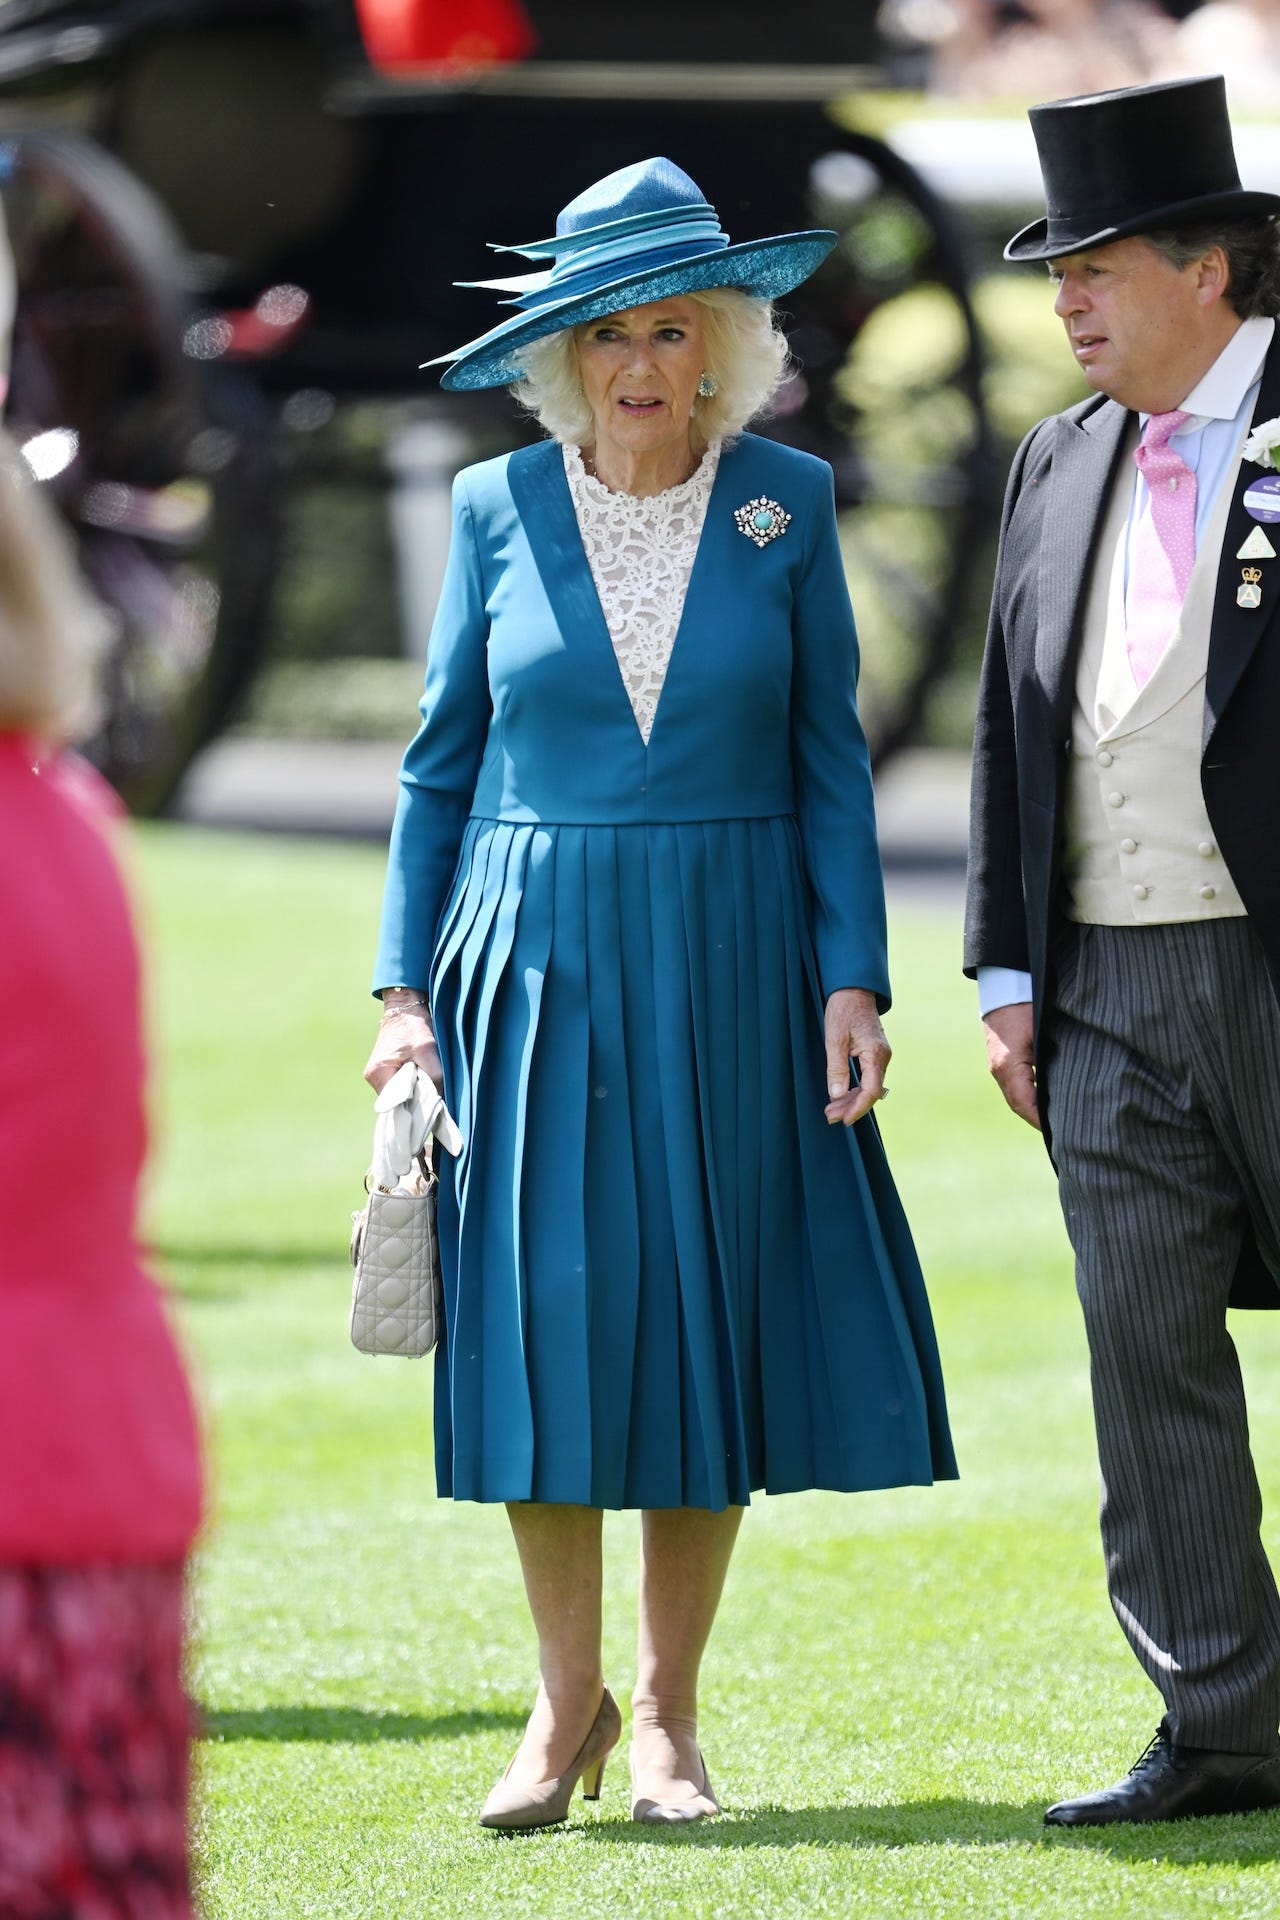 <p>Camilla's day two ensemble consisted of a deep-blue long-sleeved Dior dress with lace detailing down the bodice and a pleated skirt.</p><p>According <a href="https://wwd.com/pop-culture/celebrity-news/queen-camilla-dior-dress-royal-ascot-day-two-queen-elizabeth-brooch-1236454311/">to WWD</a>, she completed her look with a Dior handbag, a layered blue Philip Treacy hat, and a dazzling diamond-and-turquoise brooch that her late mother-in-law, Queen Elizabeth II, wore on a royal tour of Malta in 2015.</p>